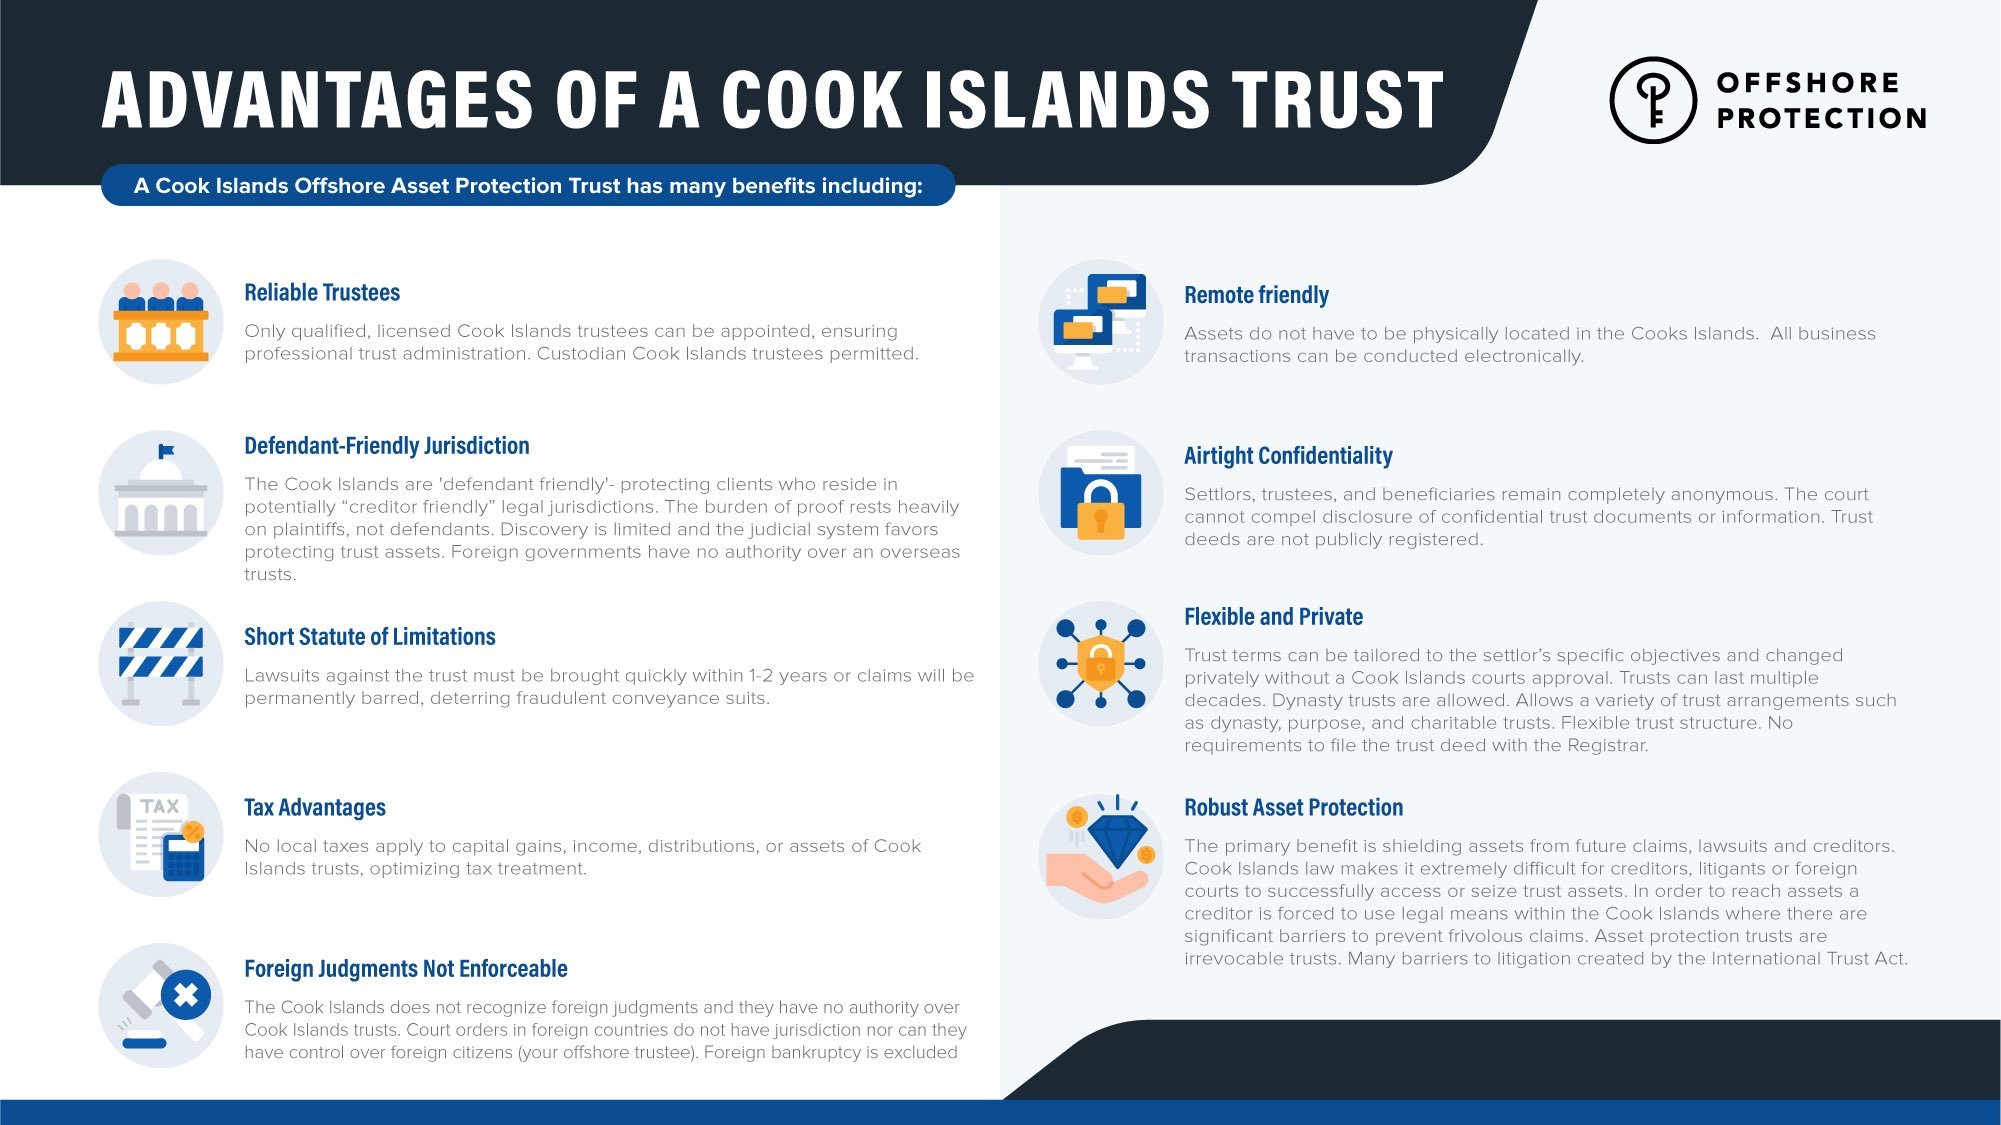 Advantages Of A Cook Islands Trust infographic.jpg